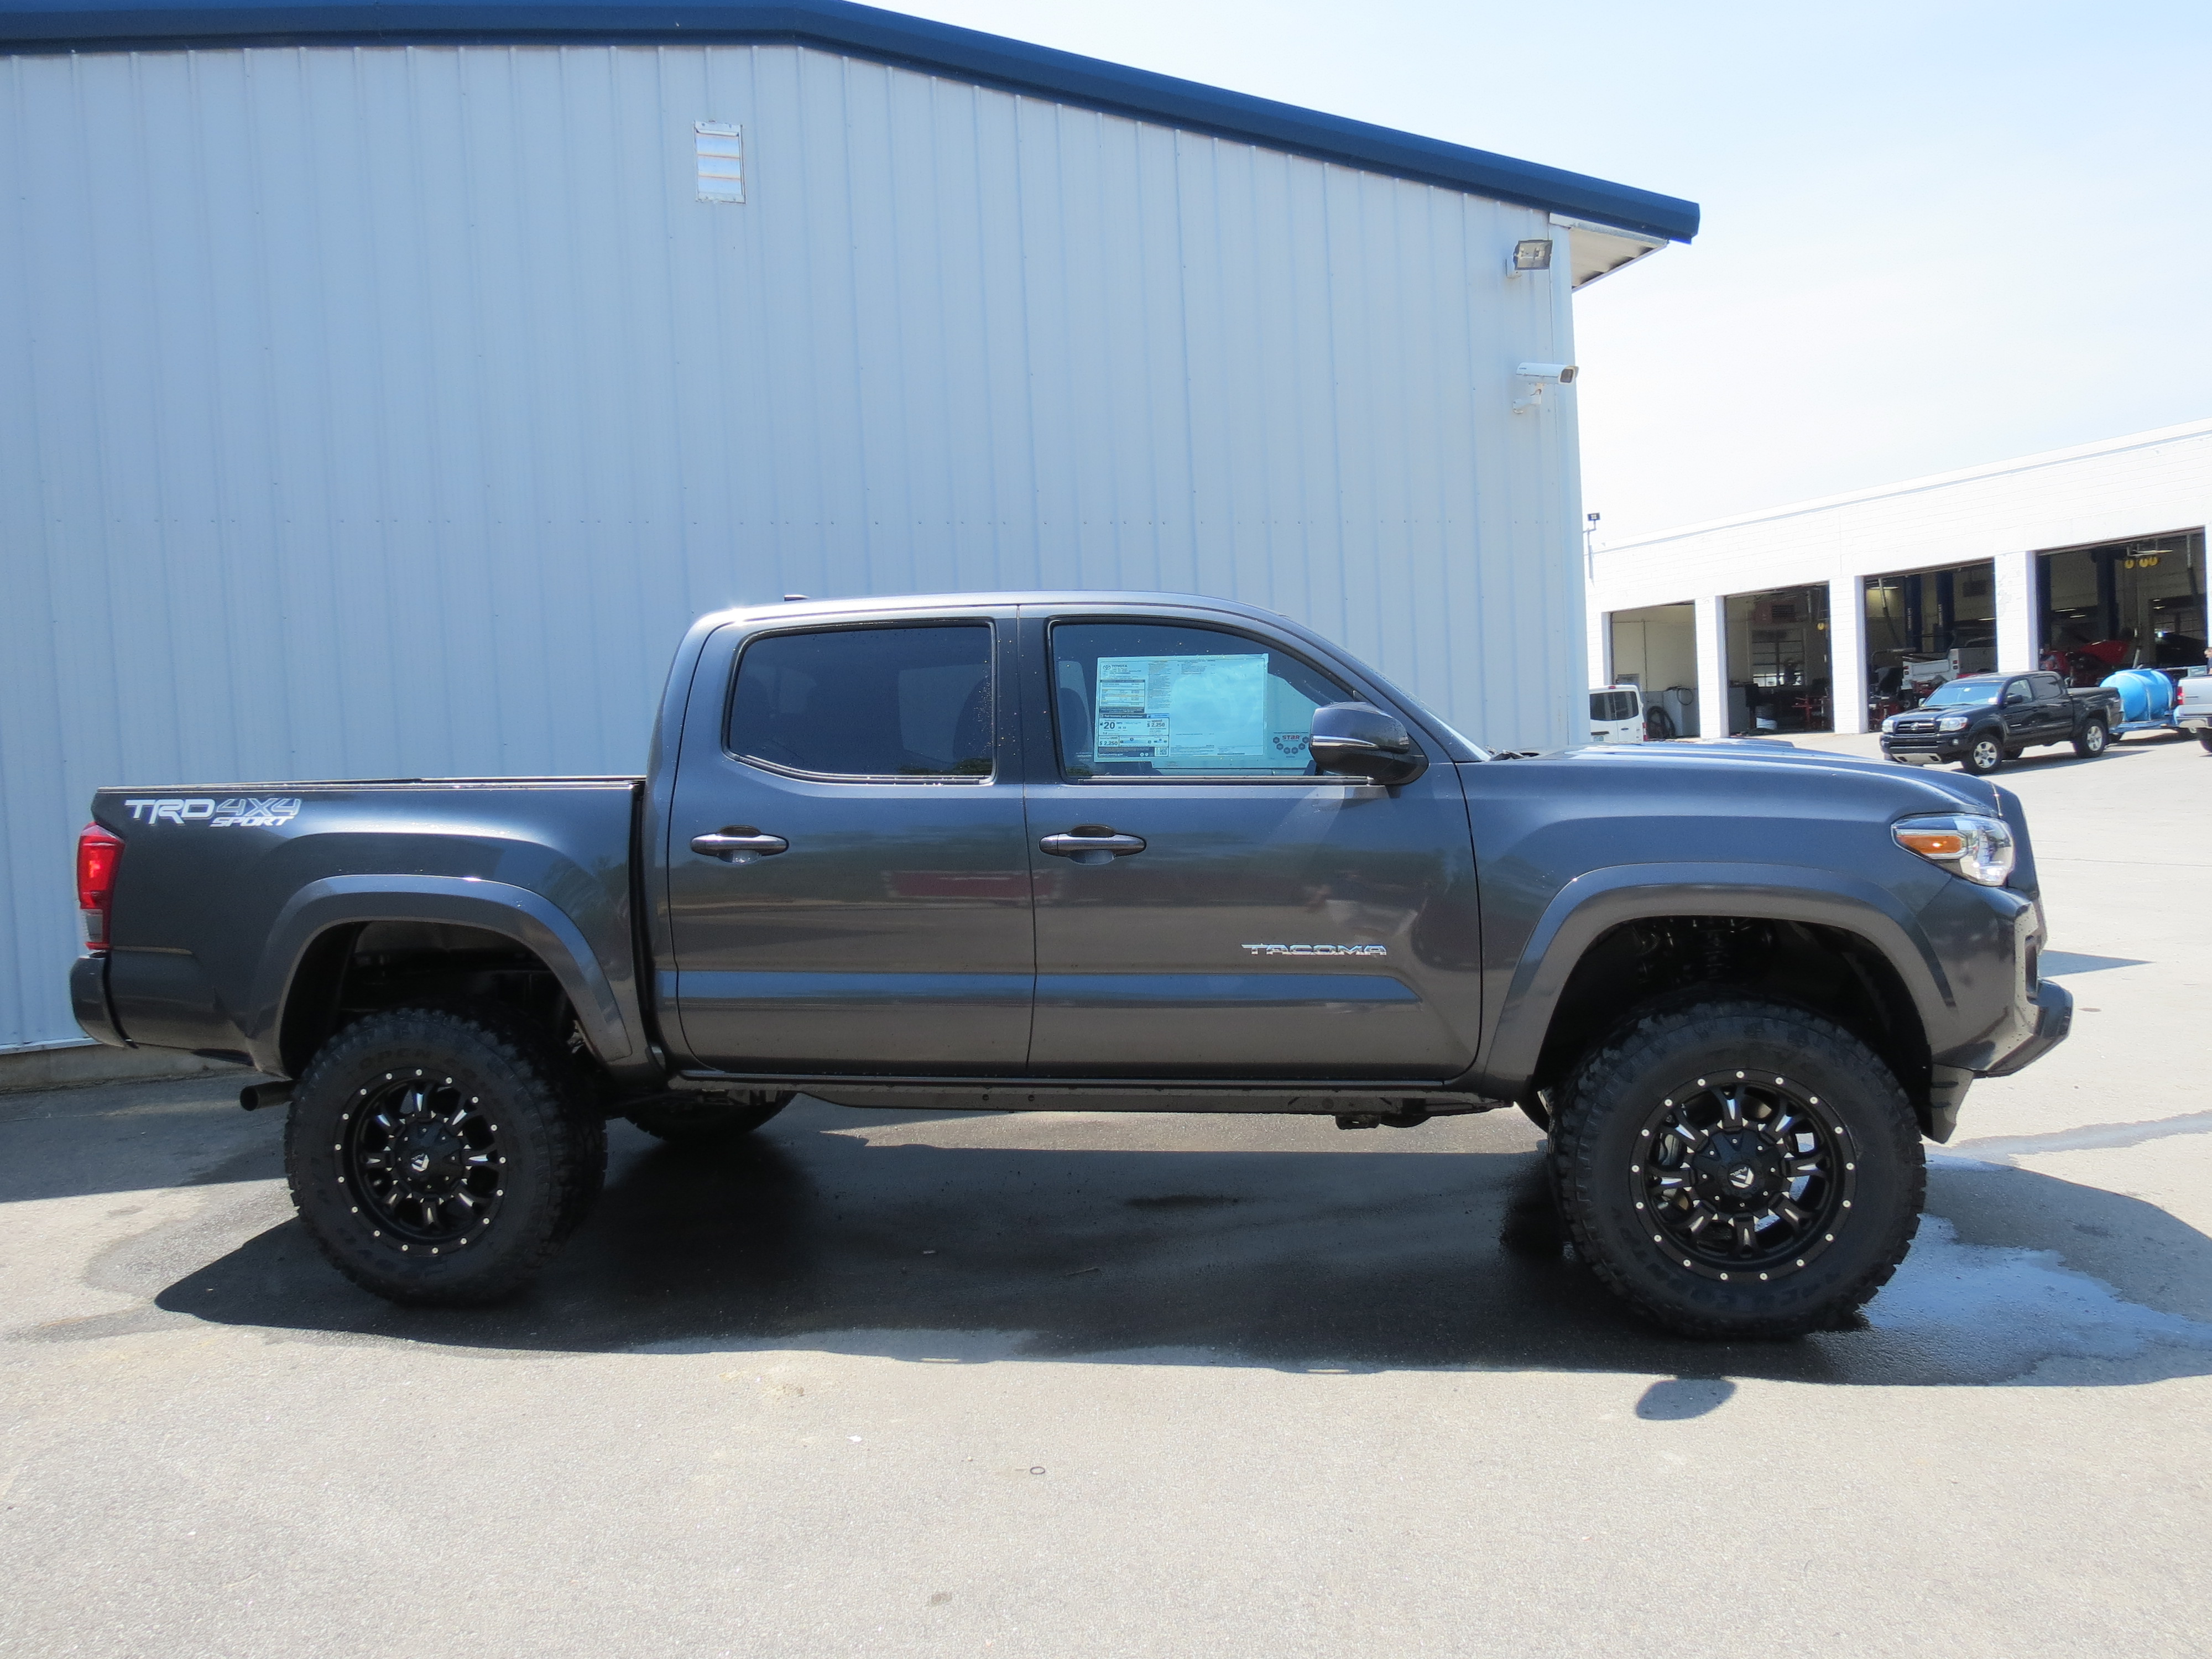 2016 Toyota Tacoma Trd Sport With A Lift Kit Irwin Toyota News